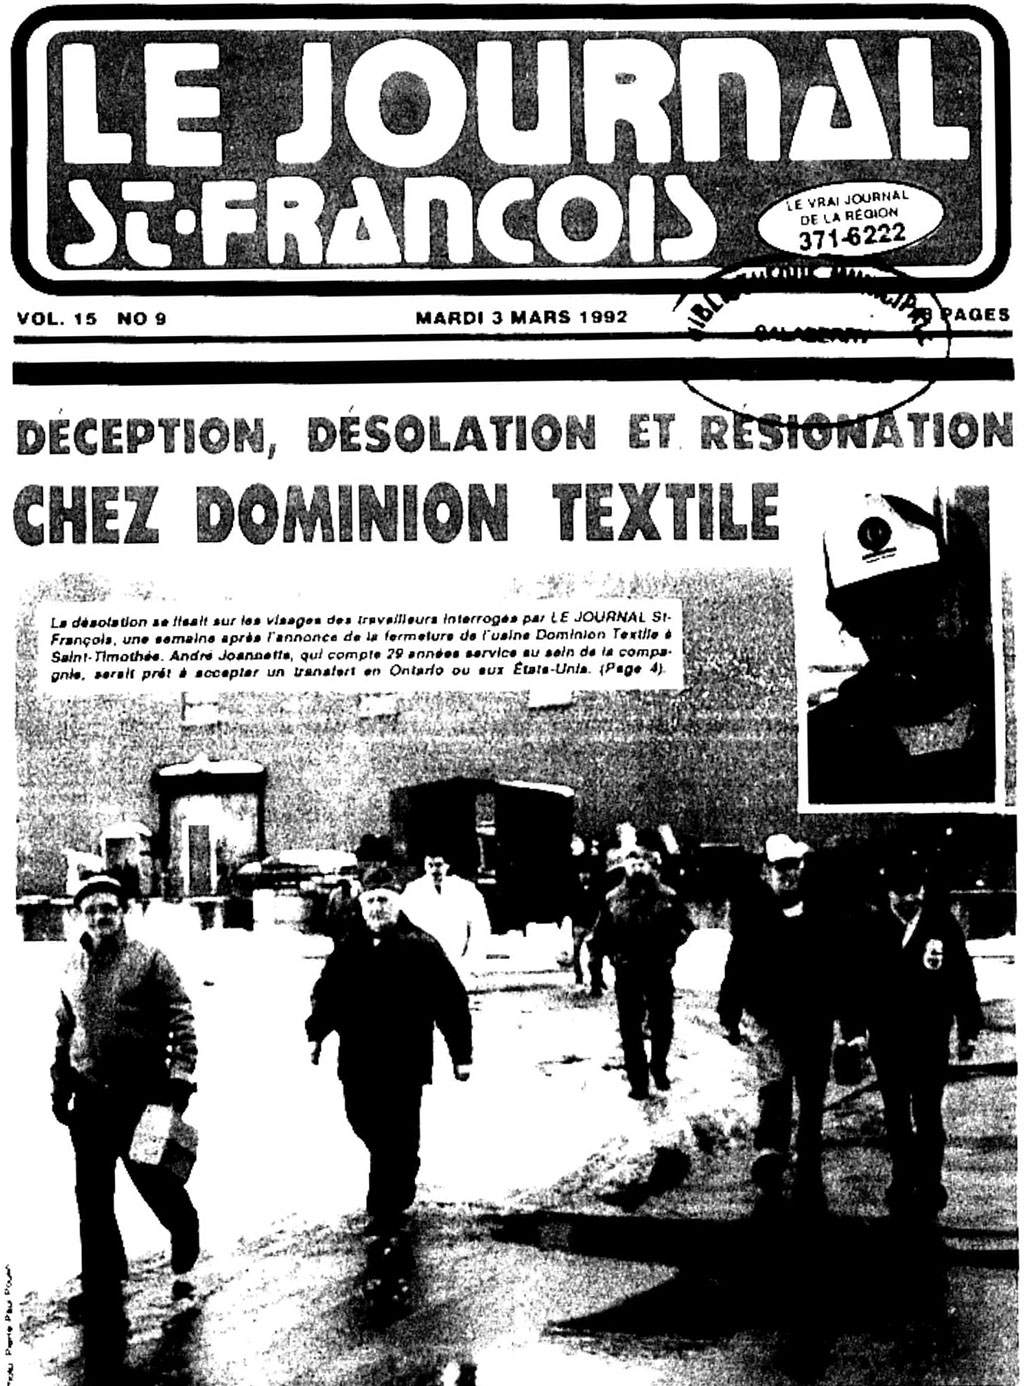 Page one of a newspaper with the headline "Deception, desolation and resignation at Dominion Textile".